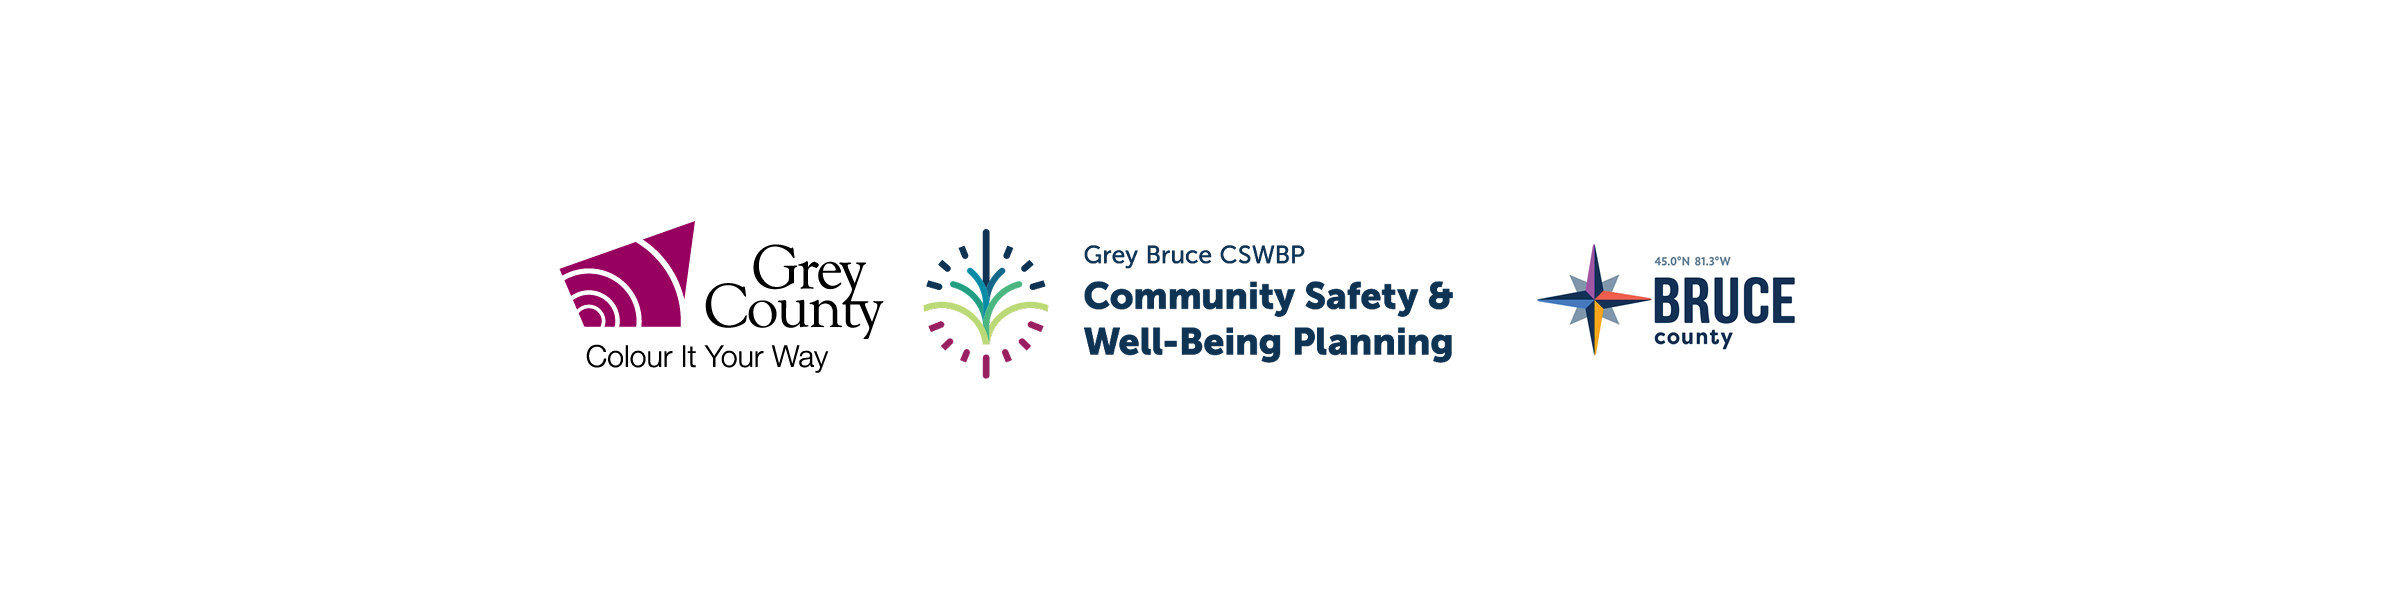 logos of grey bruce and community safety and wellbeing plan